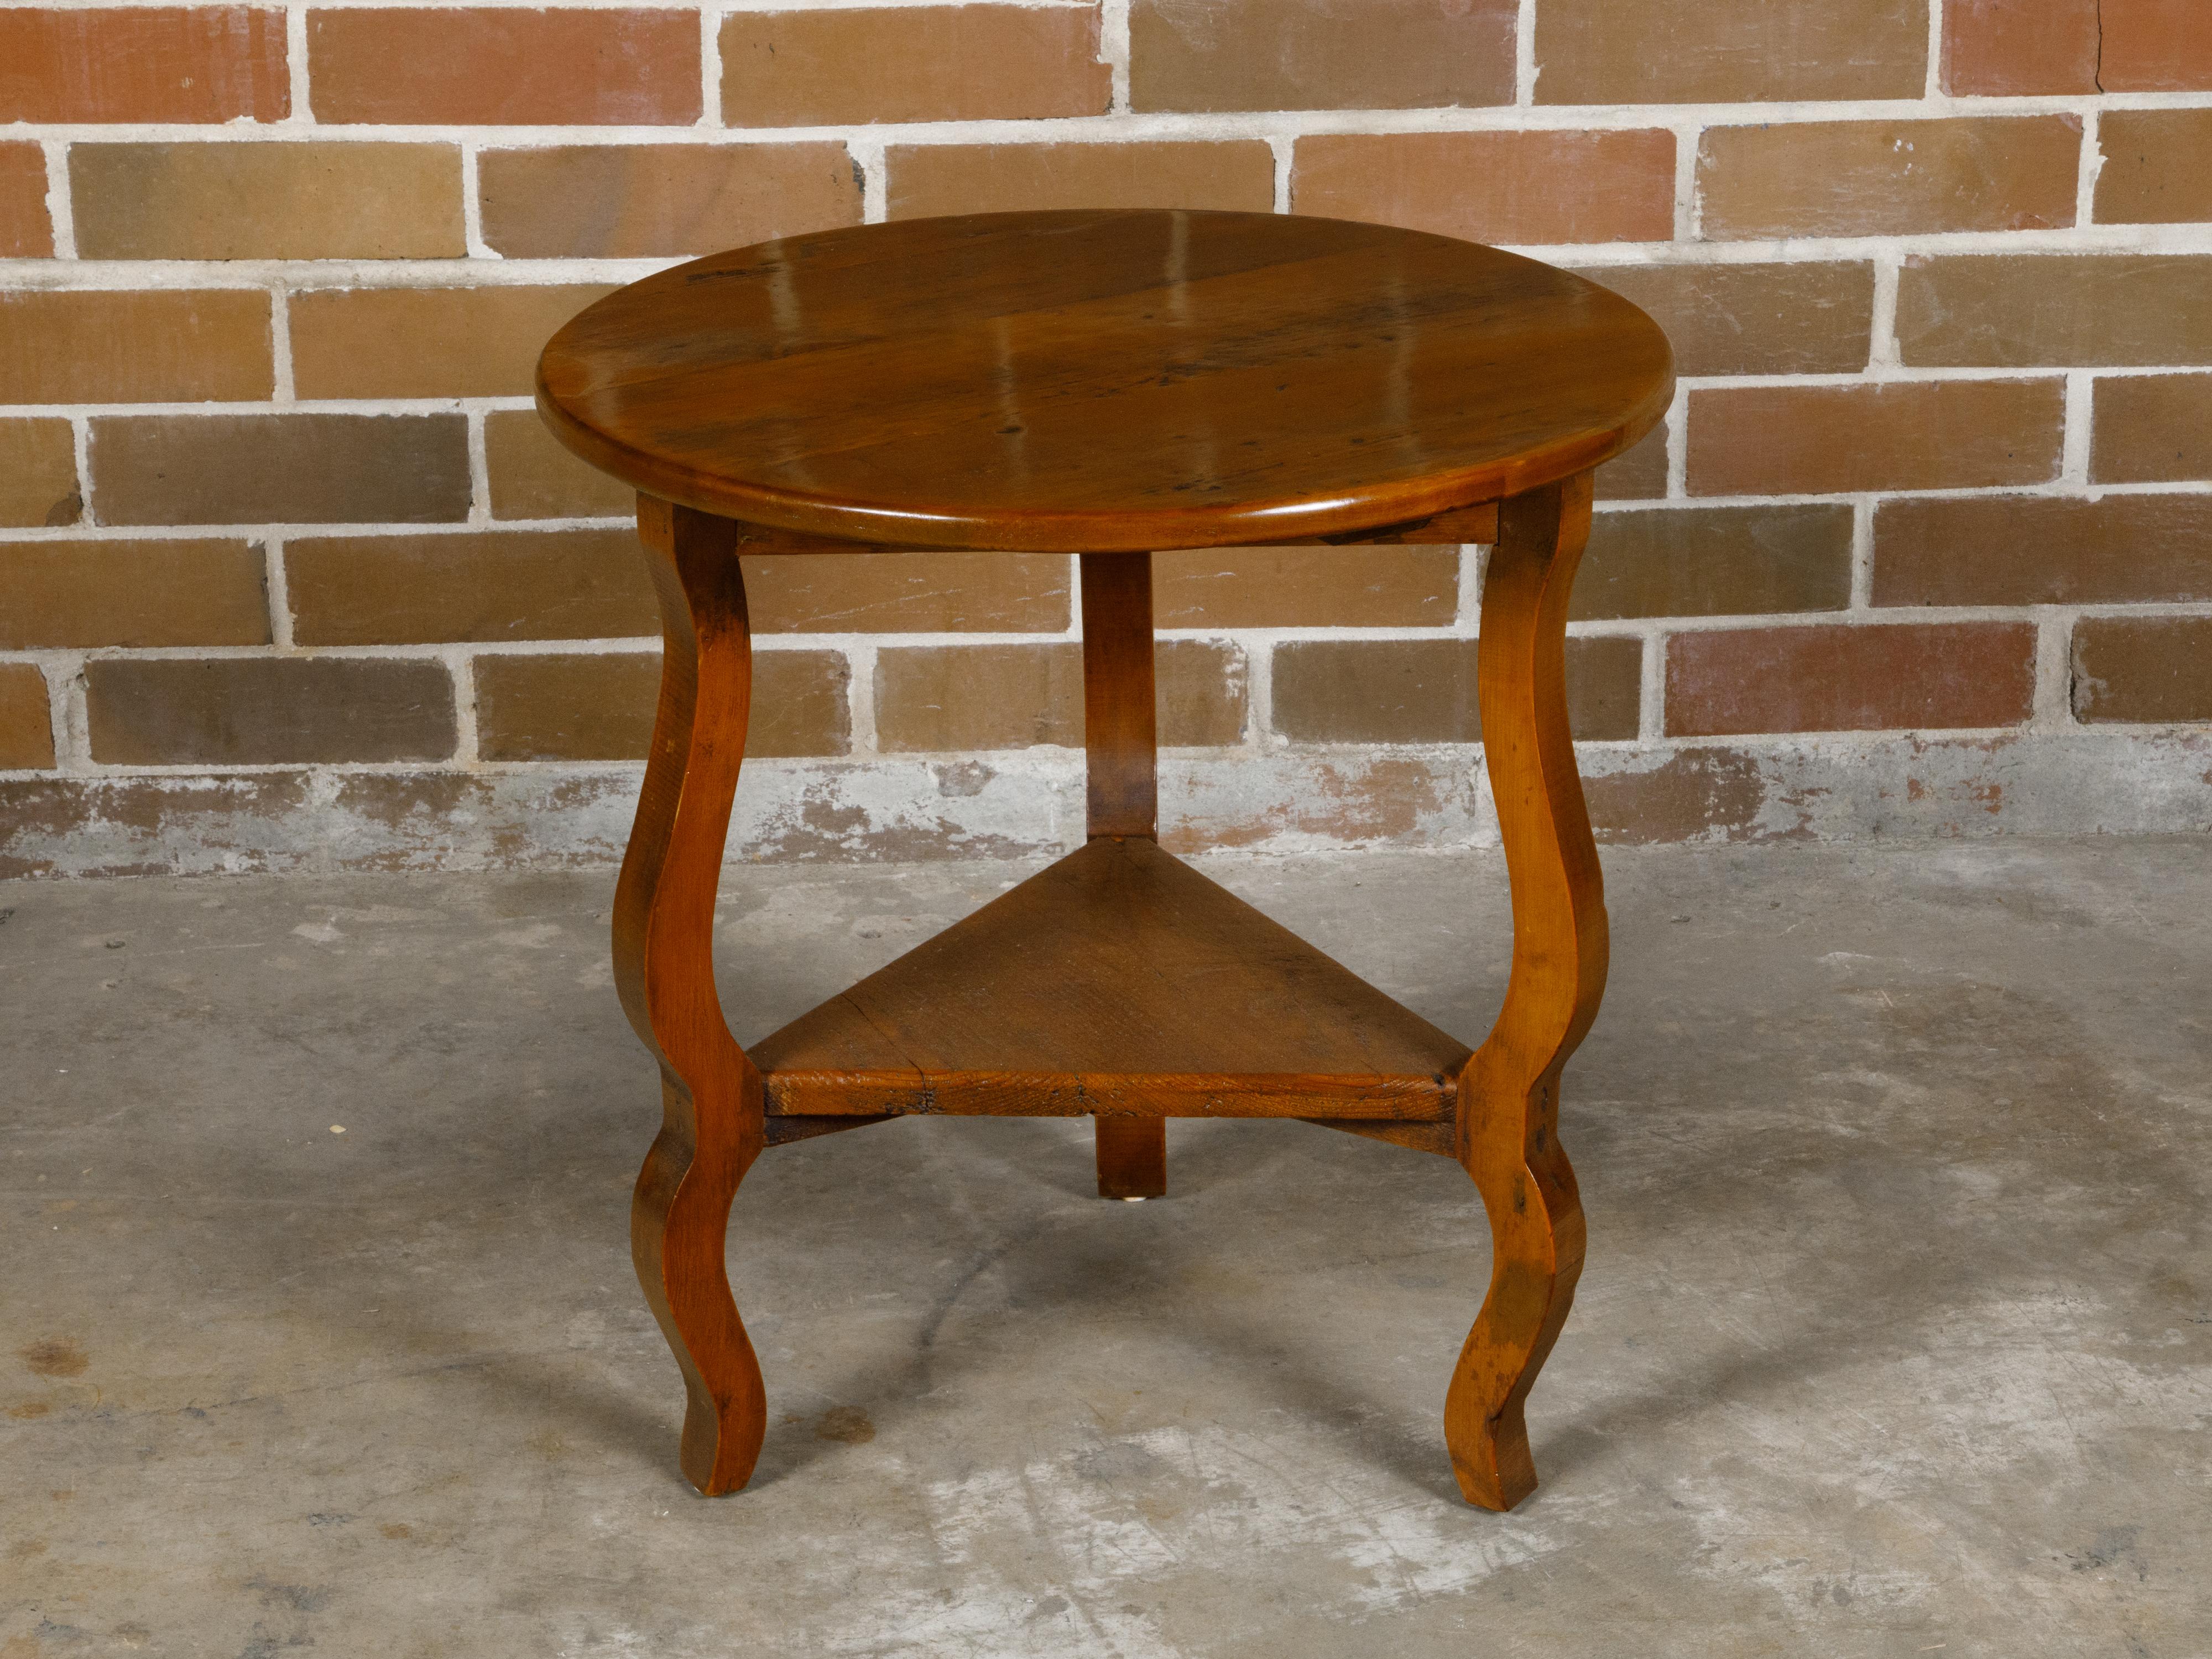 English Pine Side Table with Circular Top, Curving Legs and Triangular Shelf For Sale 4